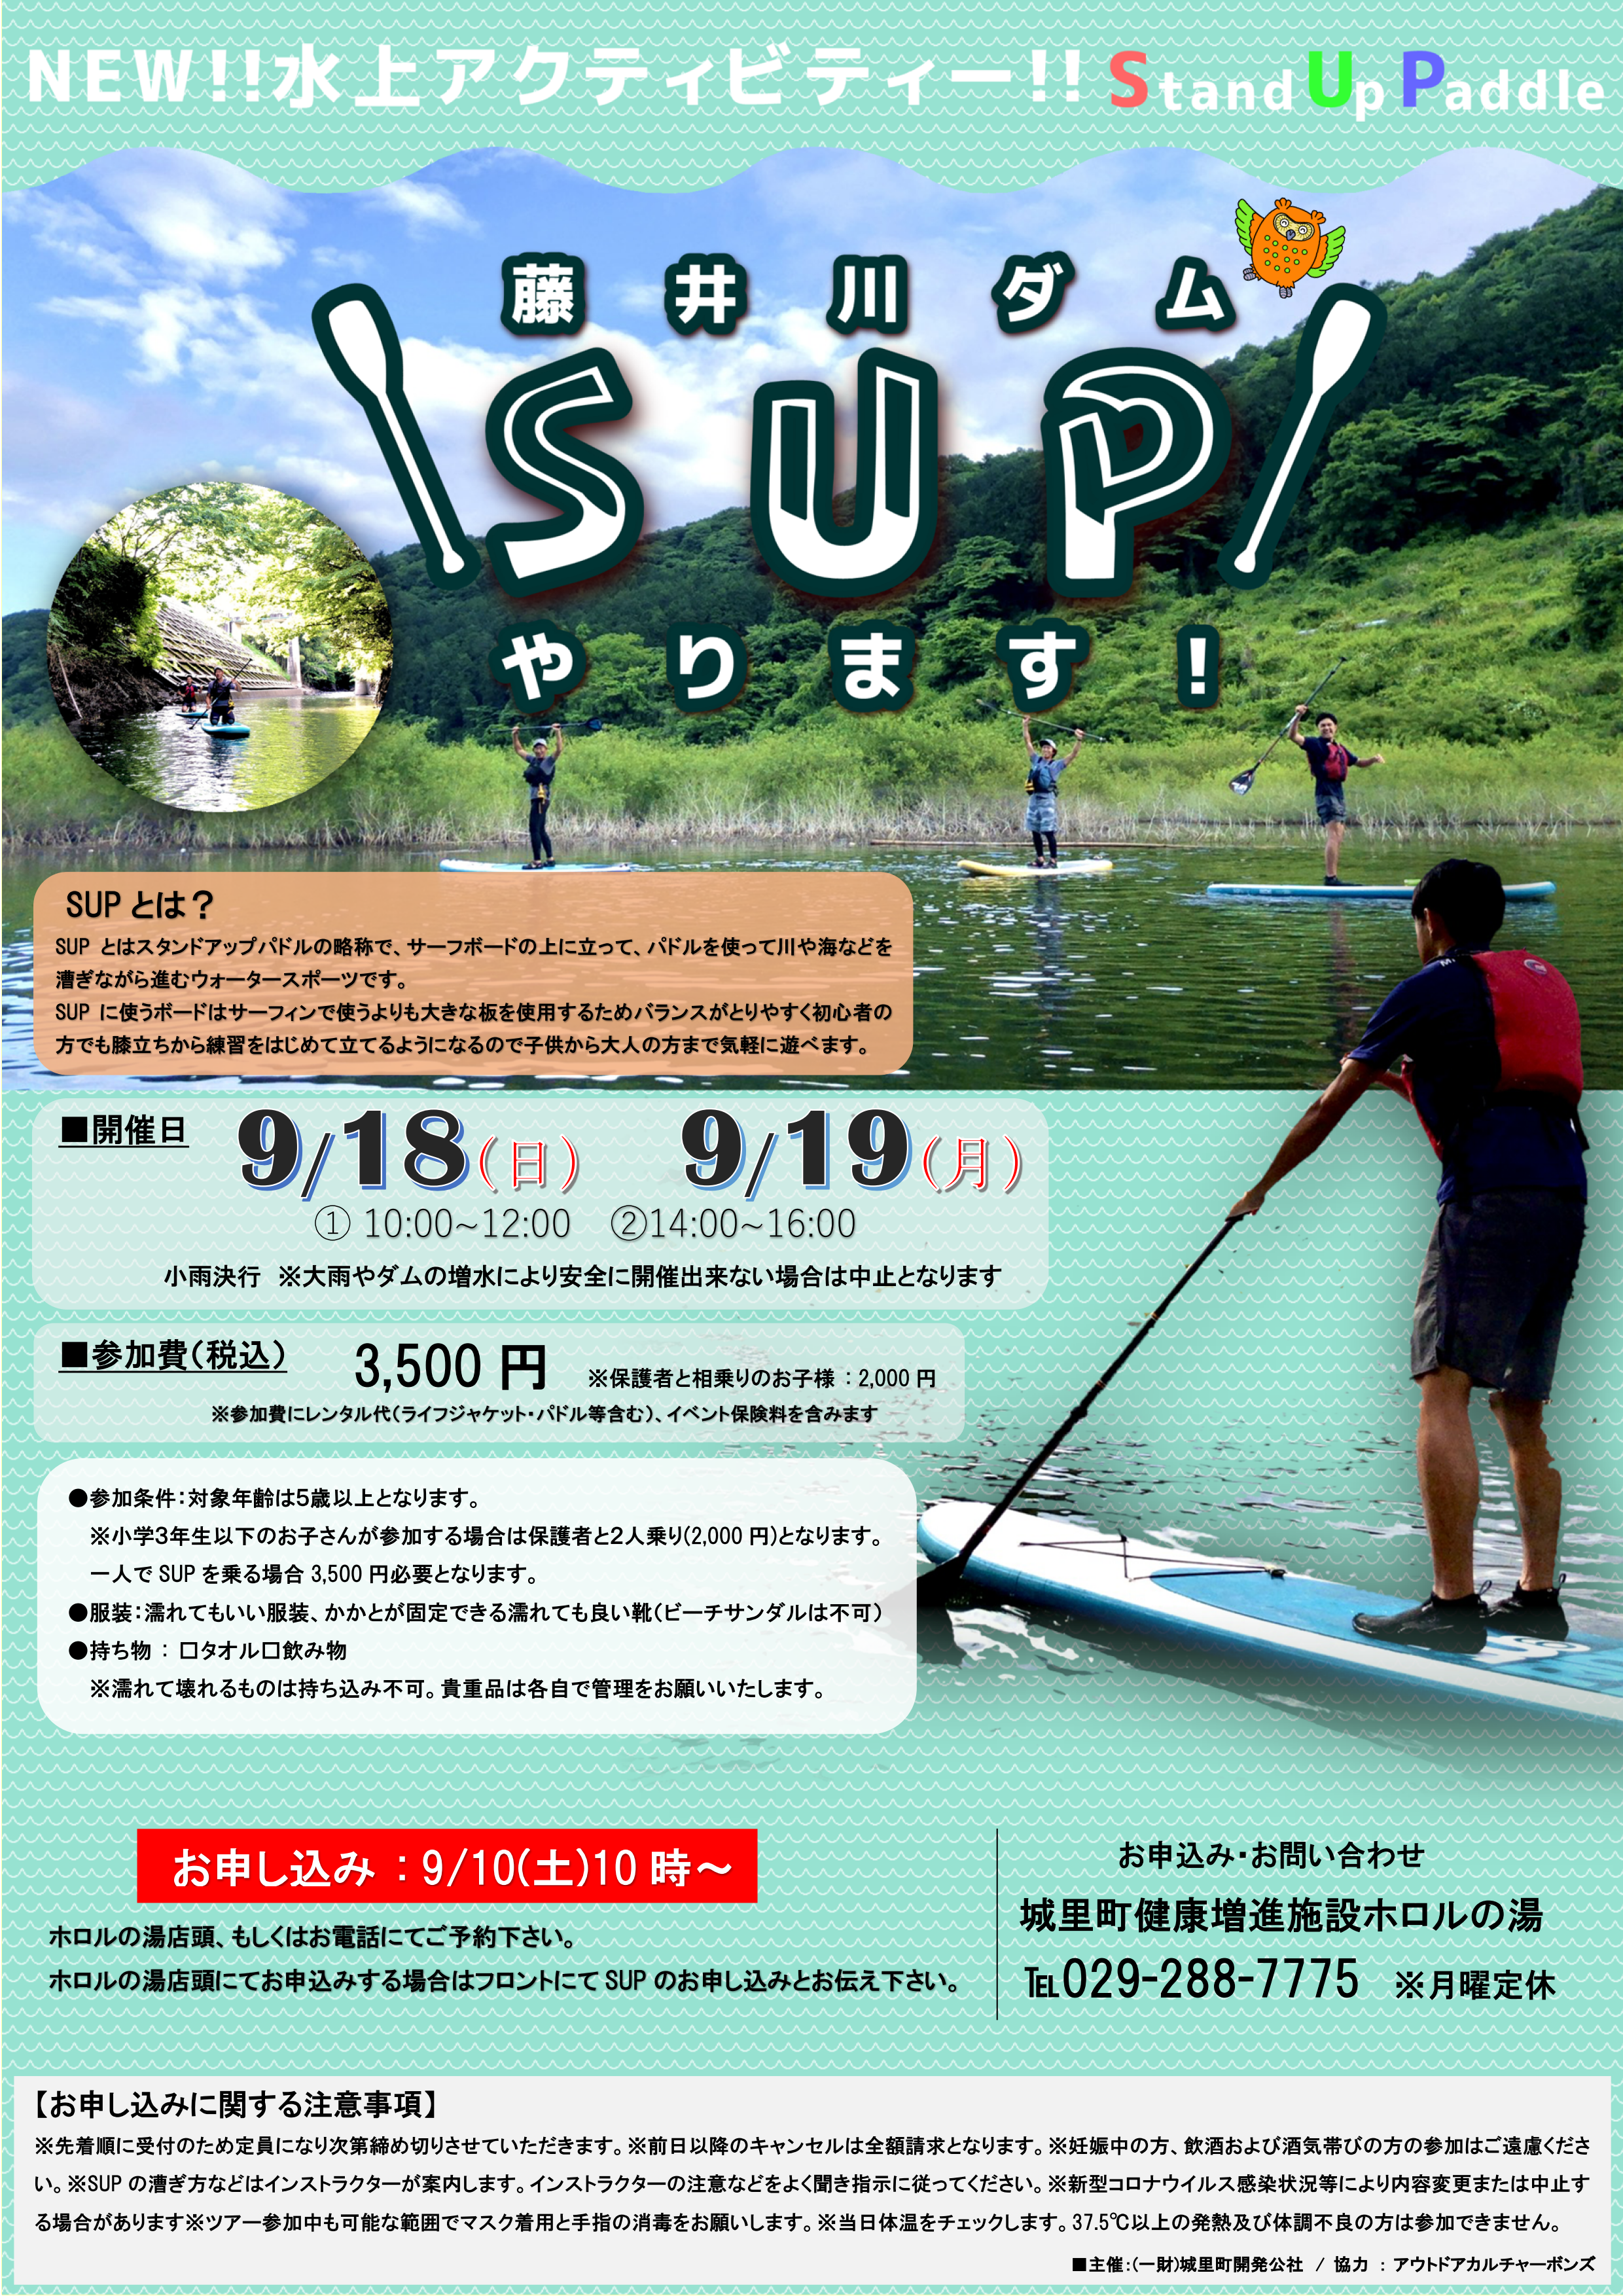 http://www.shirosatocamp.jp/news/%E3%82%B5%E3%83%83%E3%83%97%E3%83%81%E3%83%A9%E3%82%B7%20.png